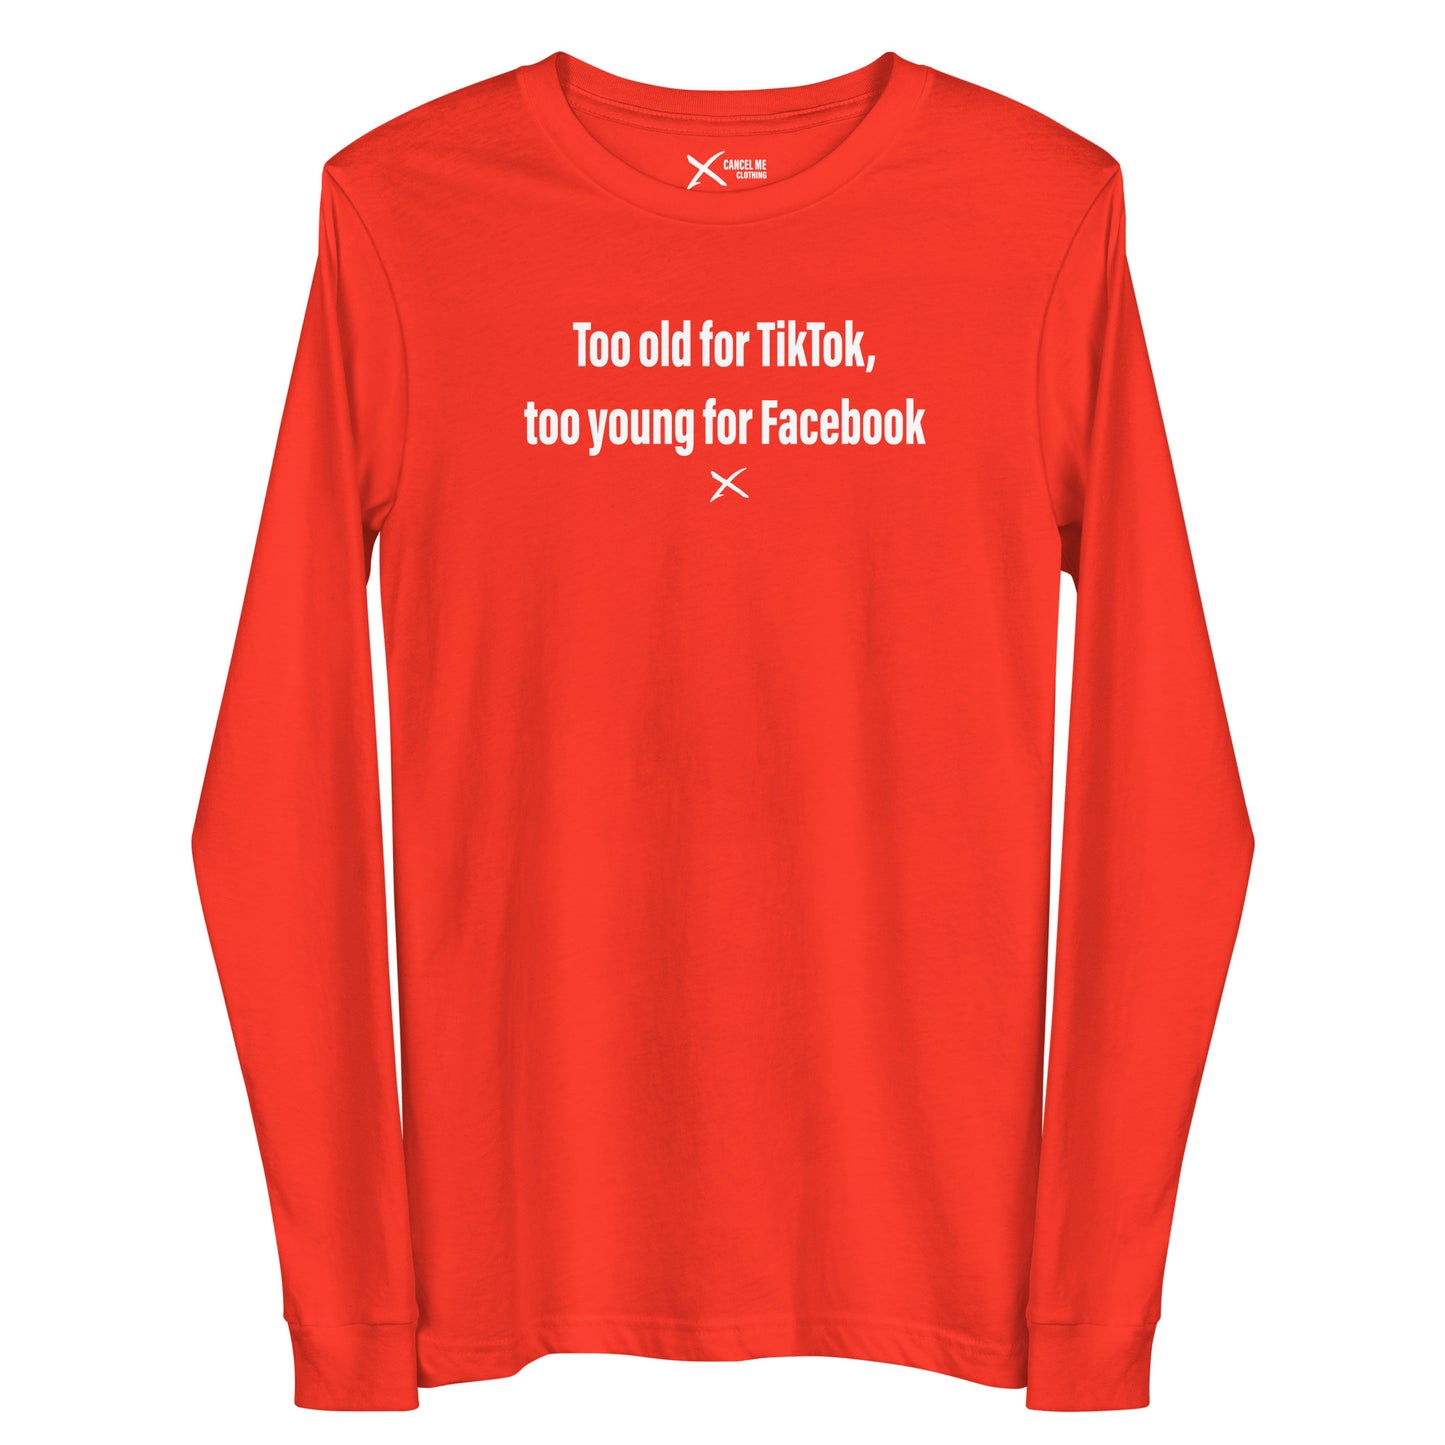 Too old for TikTok, too young for Facebook - Longsleeve